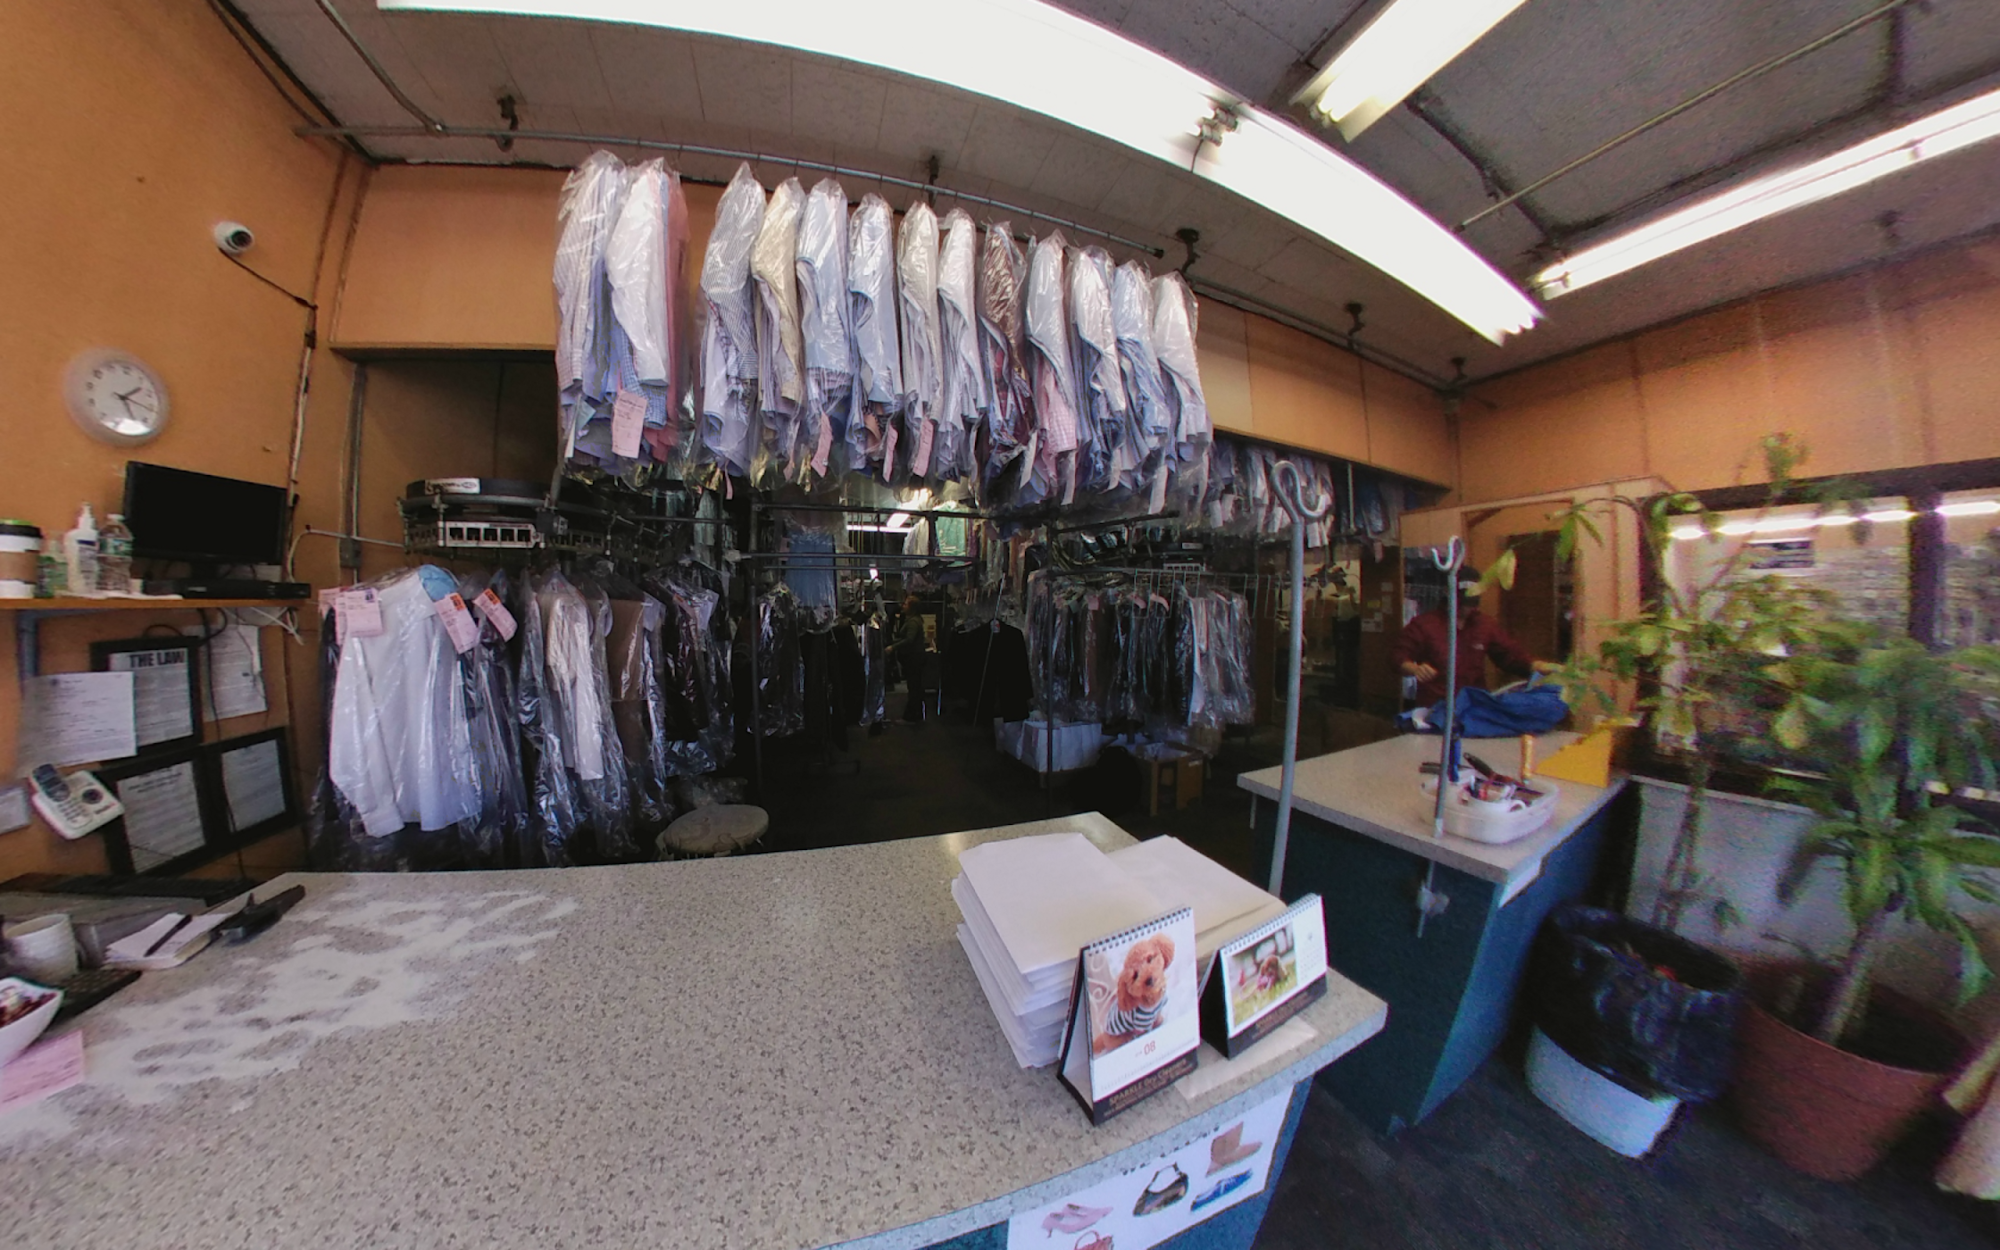 Sparkle Dry Cleaners 1018 Maple Ave, Glen Rock New Jersey 07452